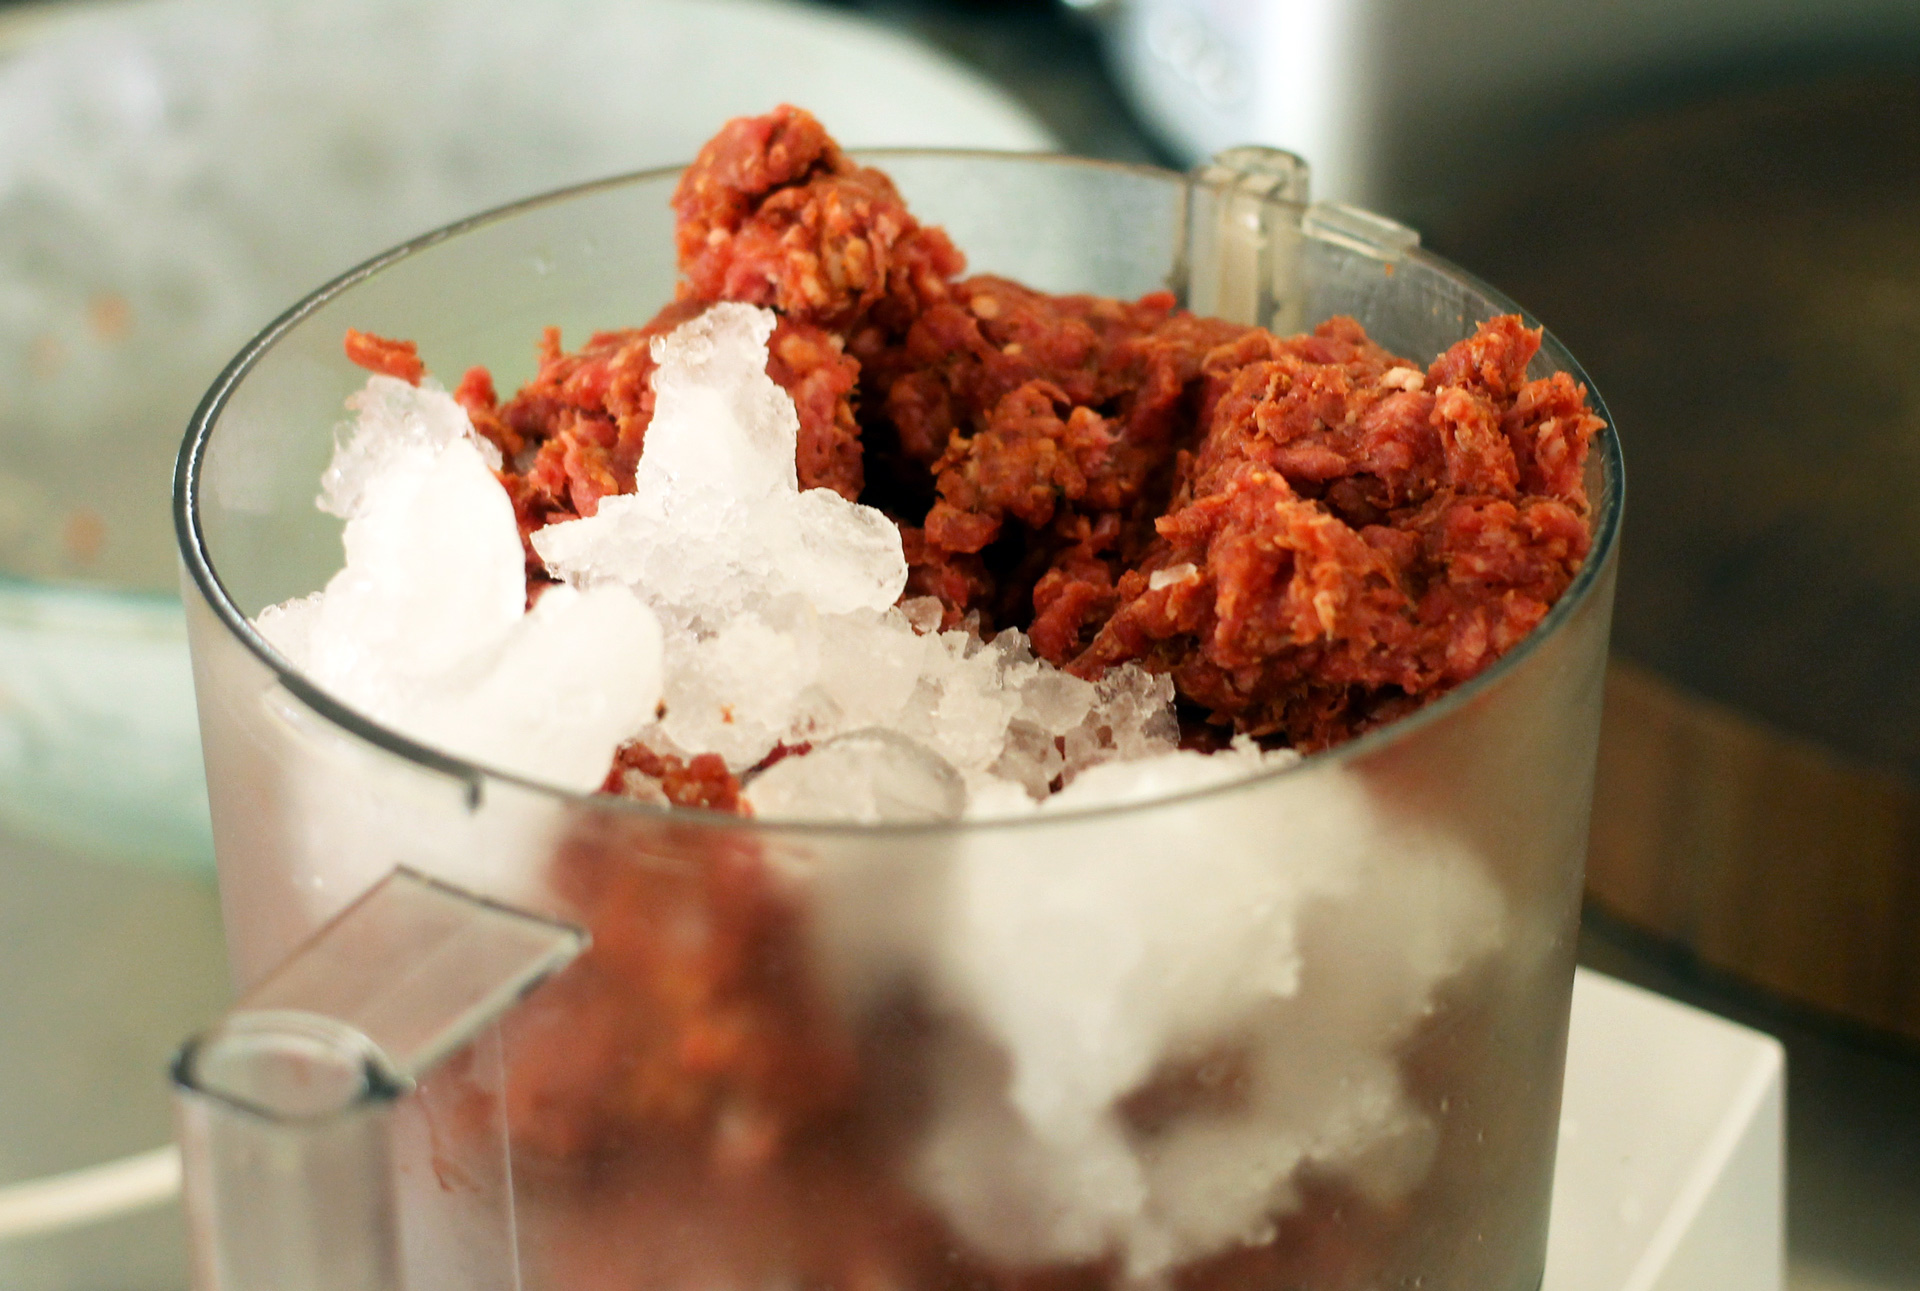 This amount of meat and ice will overflow out of a standard-sized food processor and make a giant mess.